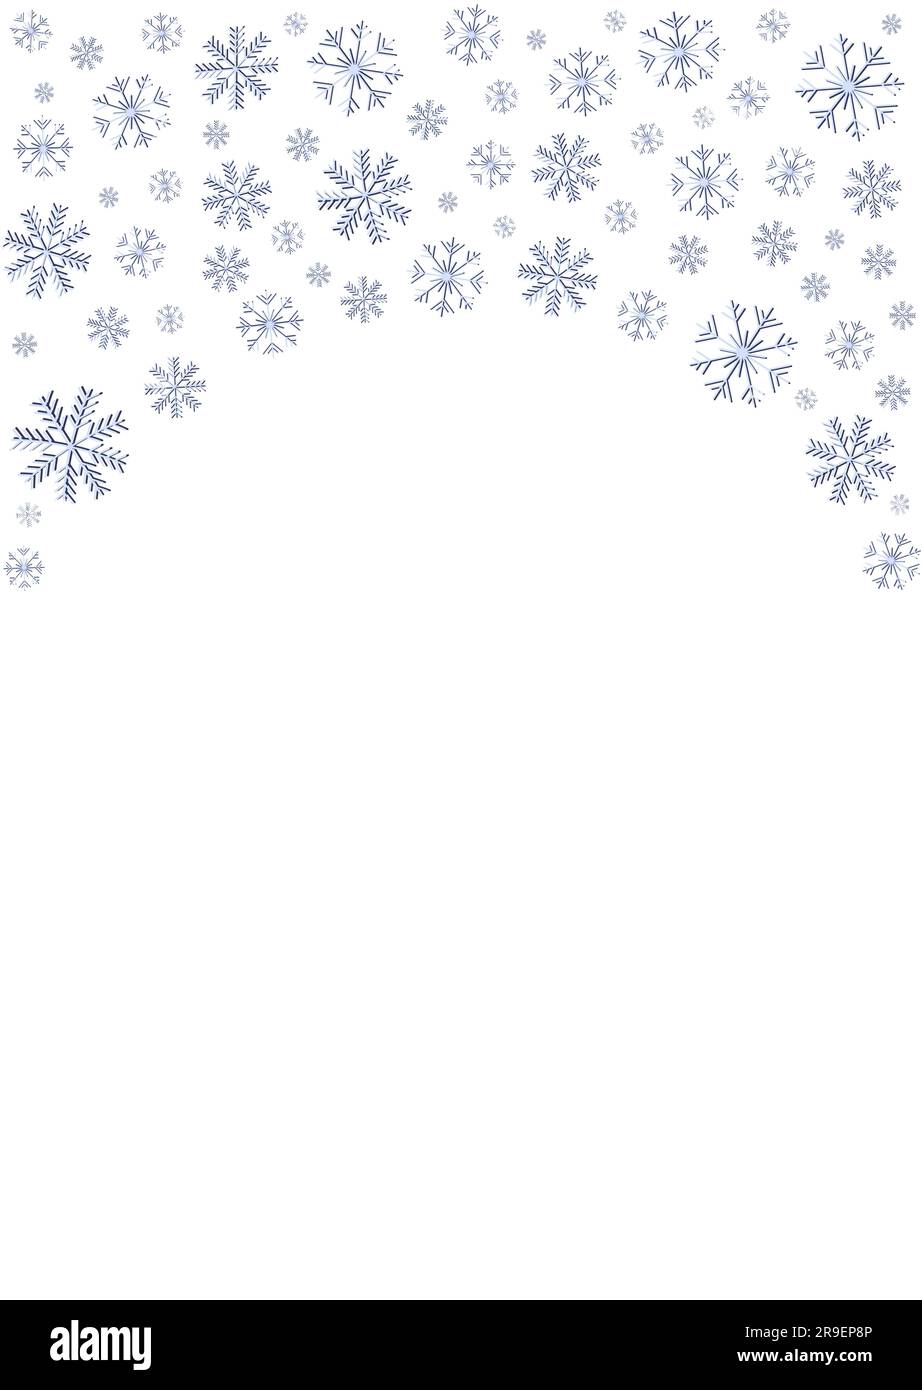 Snowflake arch Winter background template Different size snowflakes on white background Holiday vector illustration Isolated Vertical design element Stock Vector